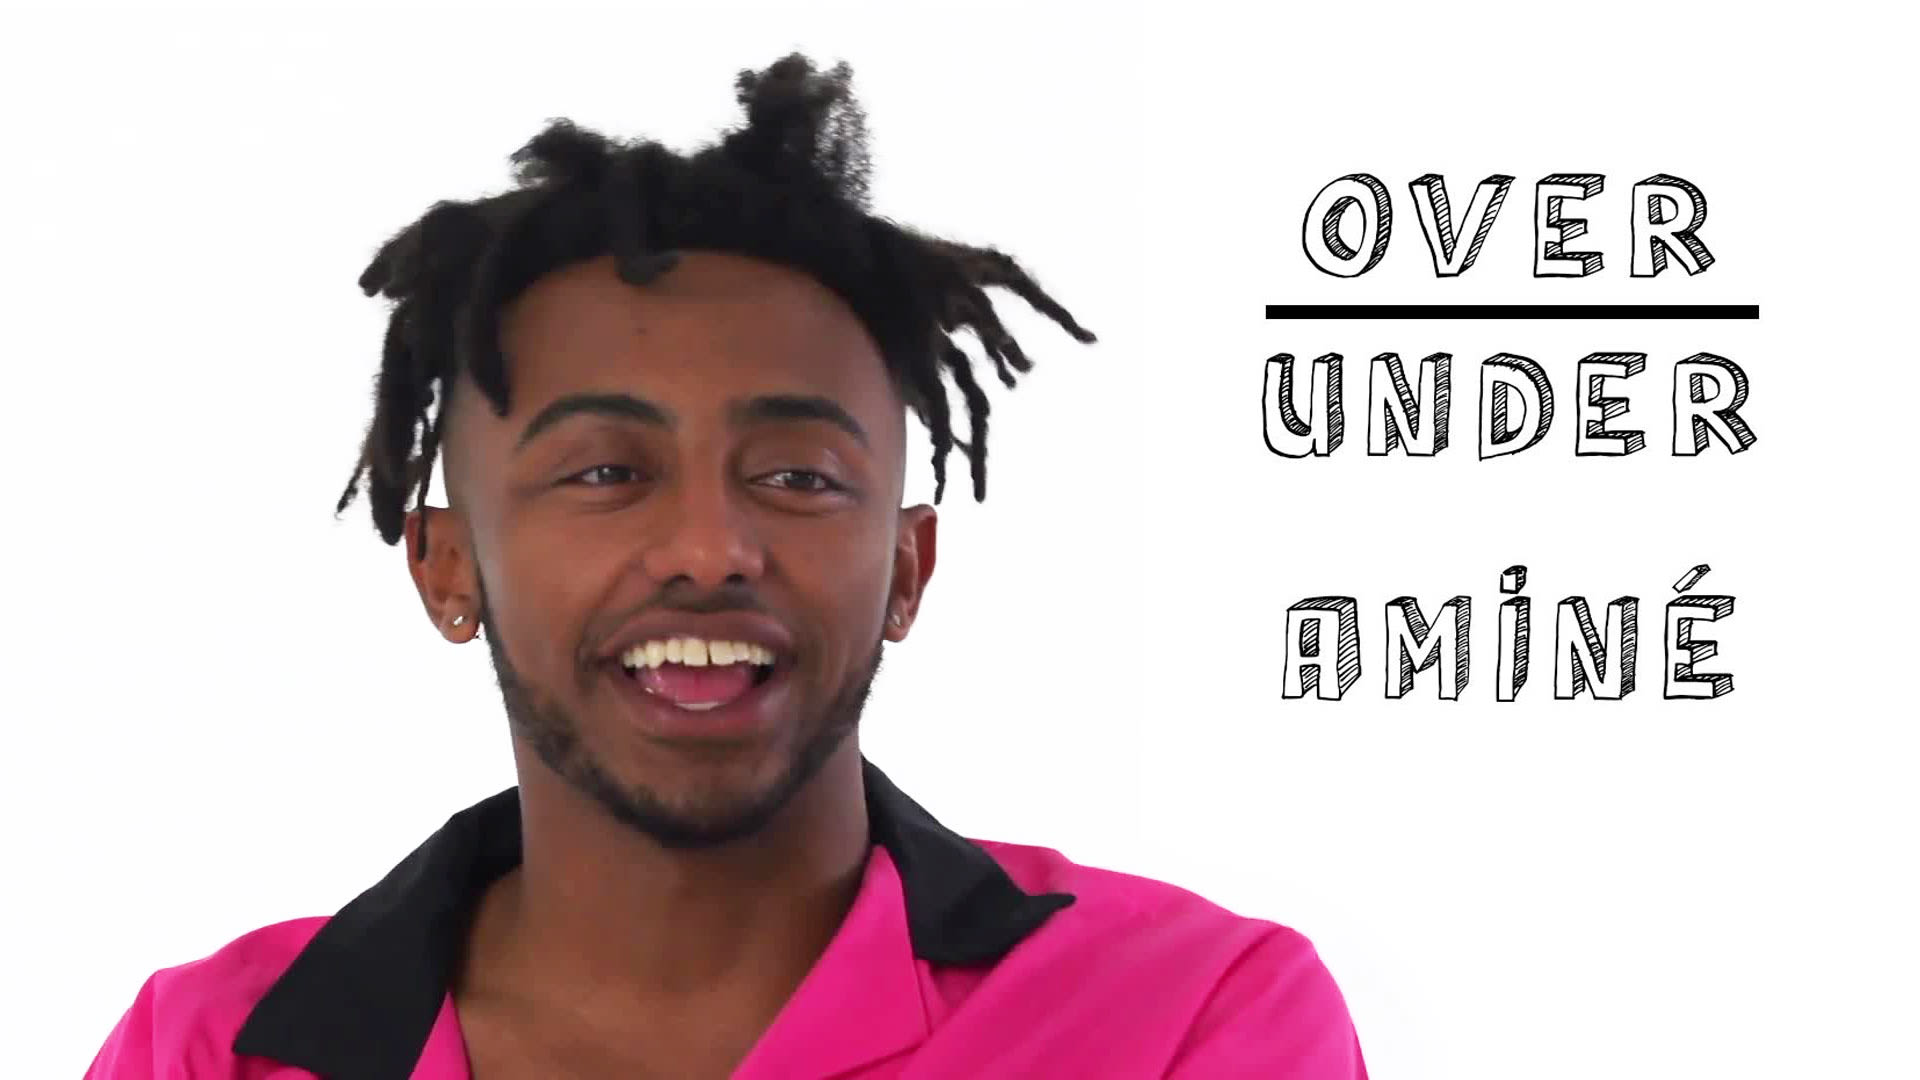 Hairy Teen Desi Girls - Watch AminÃ© Rates Boy Bands, Nude Bicycling, and Wardrobe Malfunctions |  Over/Under | Pitchfork